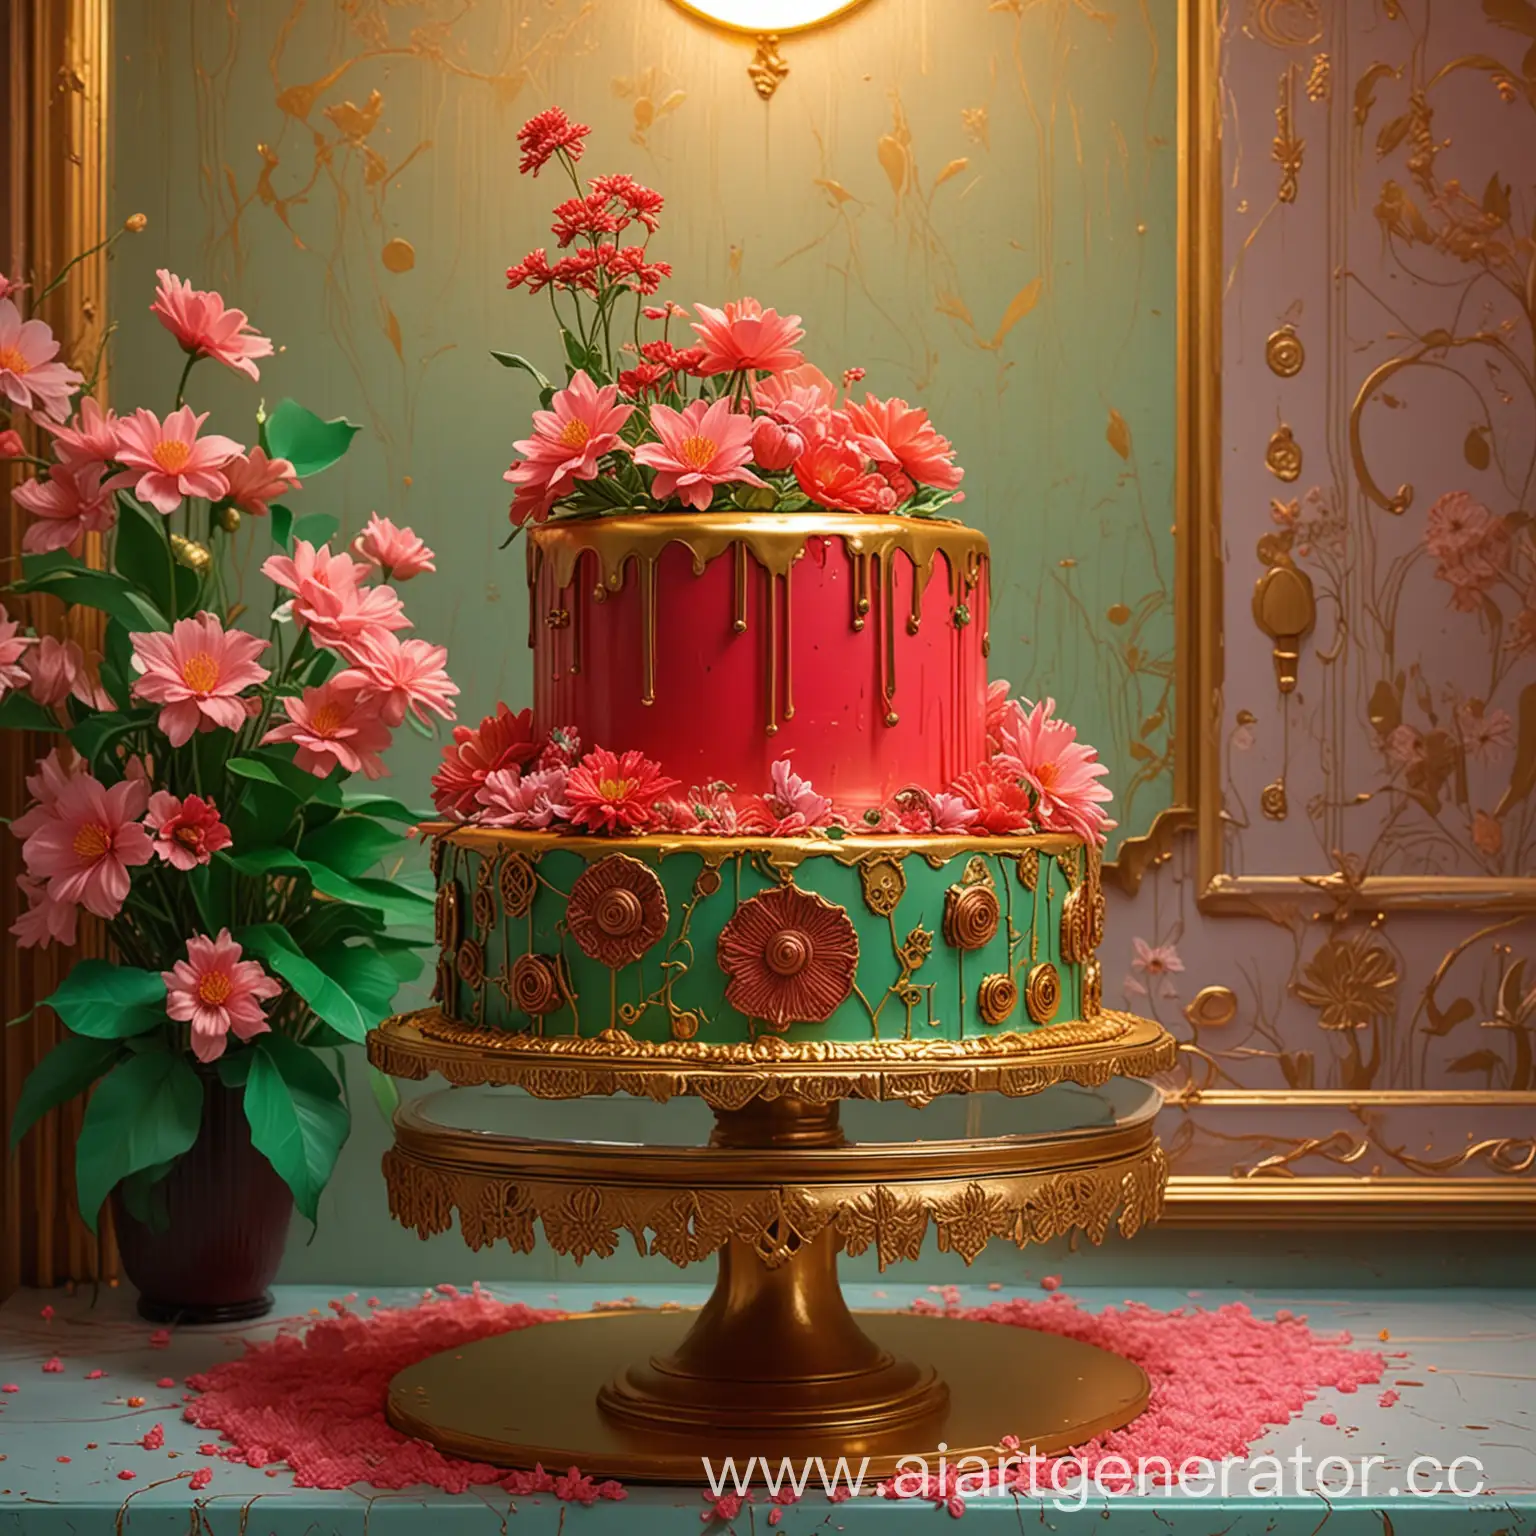 Art-Deco-Cake-with-Red-Glaze-and-Neon-Lighting